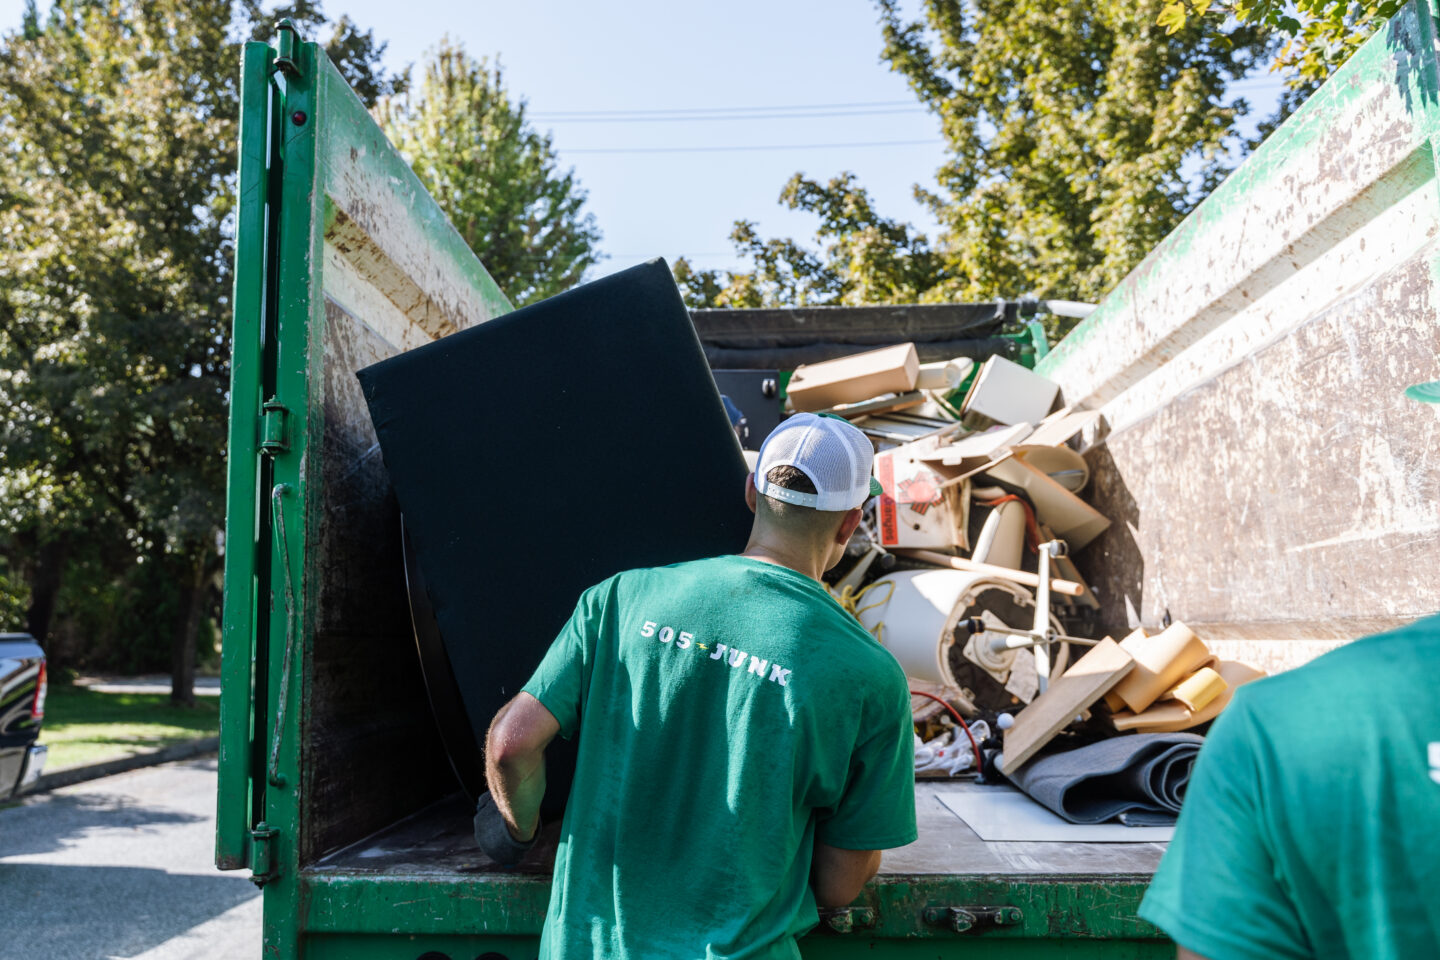 A 505-Junk employee loading the sofa into the truck during a couch removal in North Vancouver.